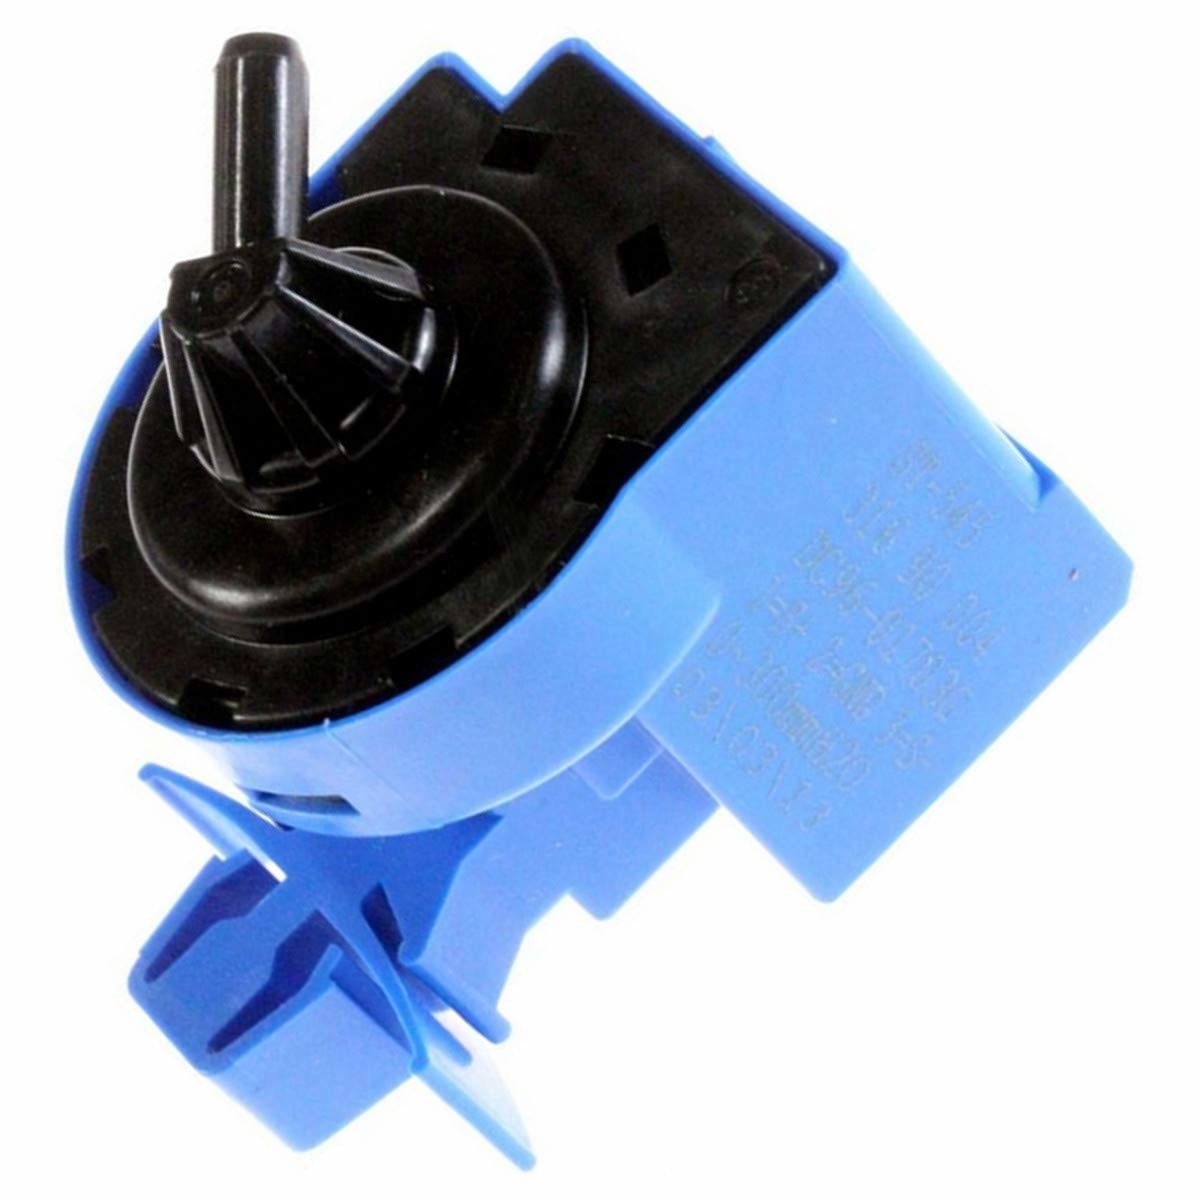 Samsung Washer Water Level Pressure Switch - DC96-01703G, Replaces: DC96-01703Q AP5623035 3997569 PS4217083 EAP4217083 PD00026135 PARTS OF CANADA LTD